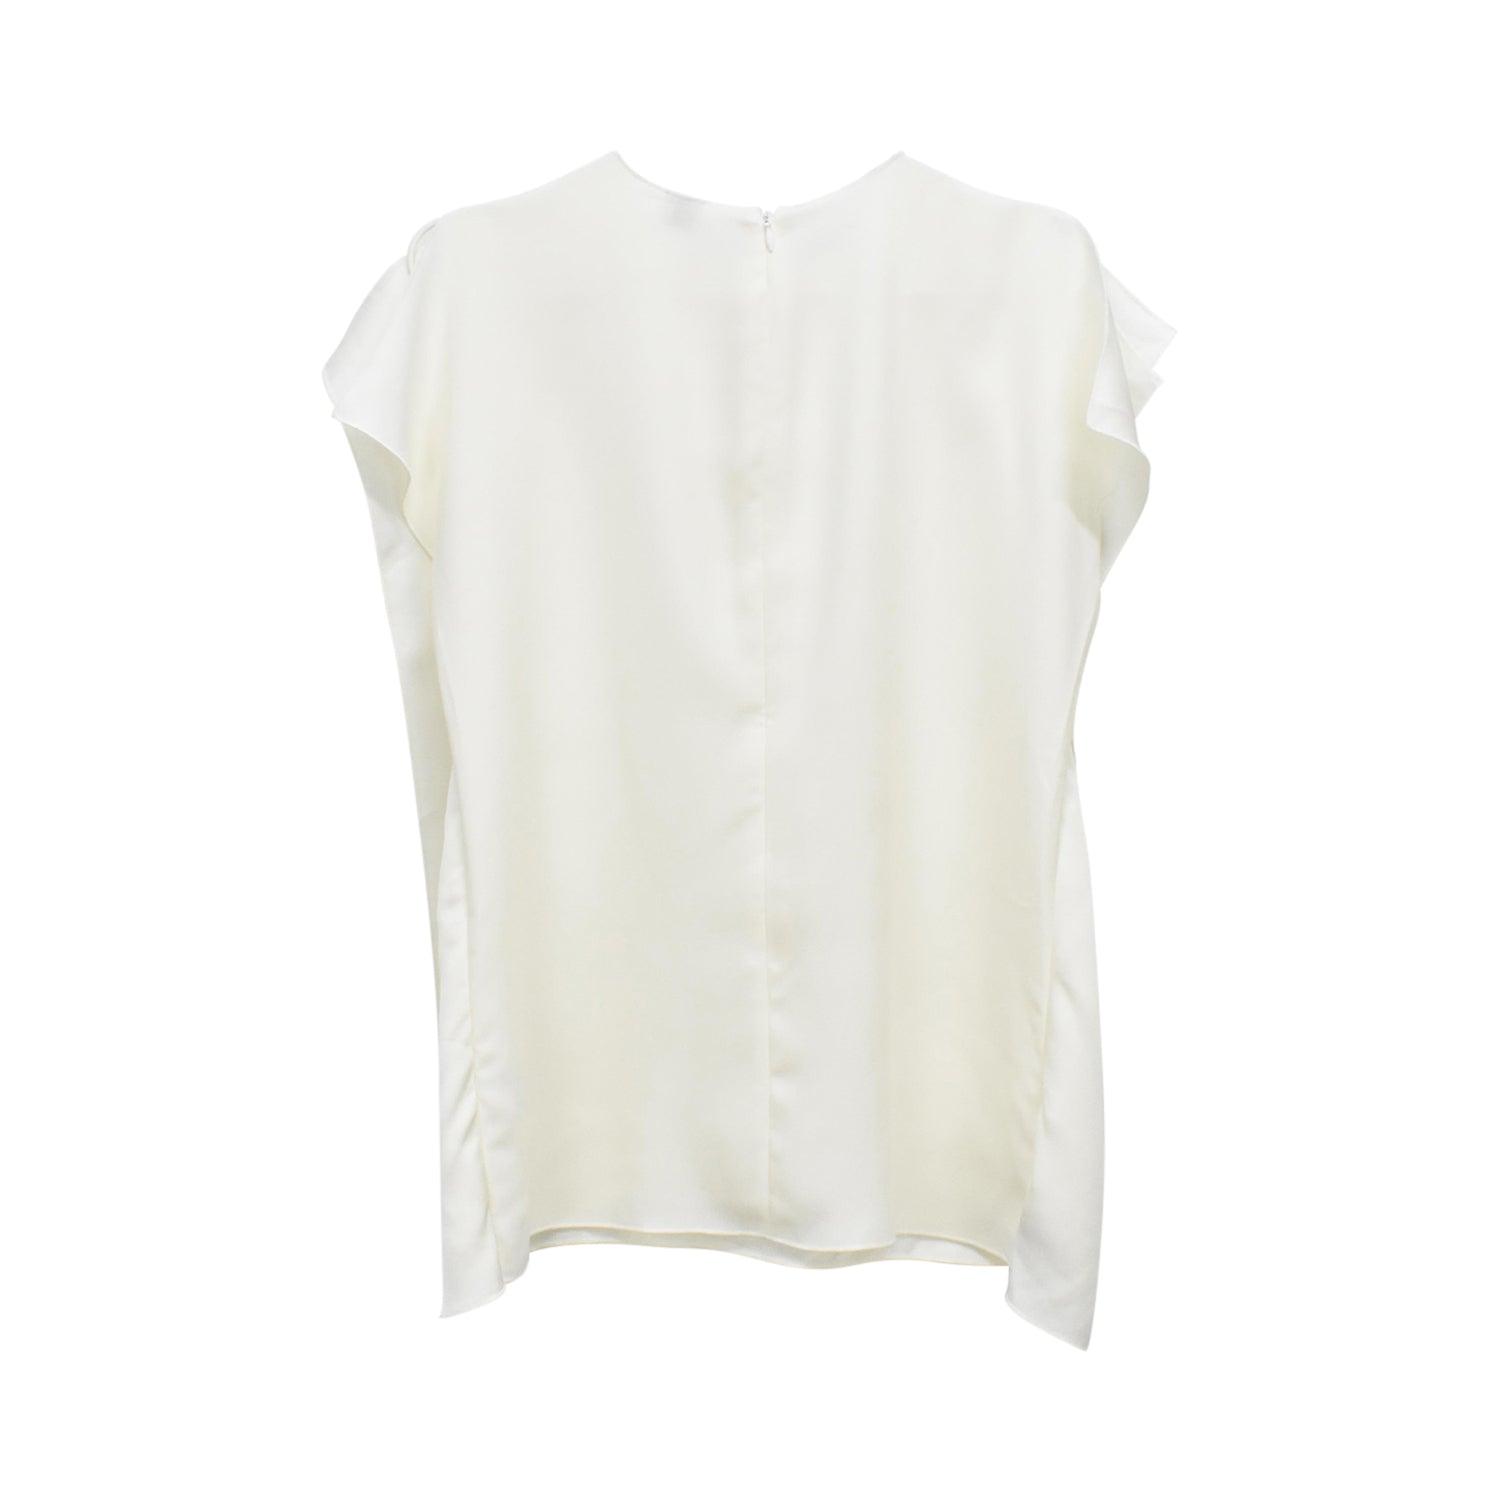 Toteme Blouse - Women's 34 - Fashionably Yours